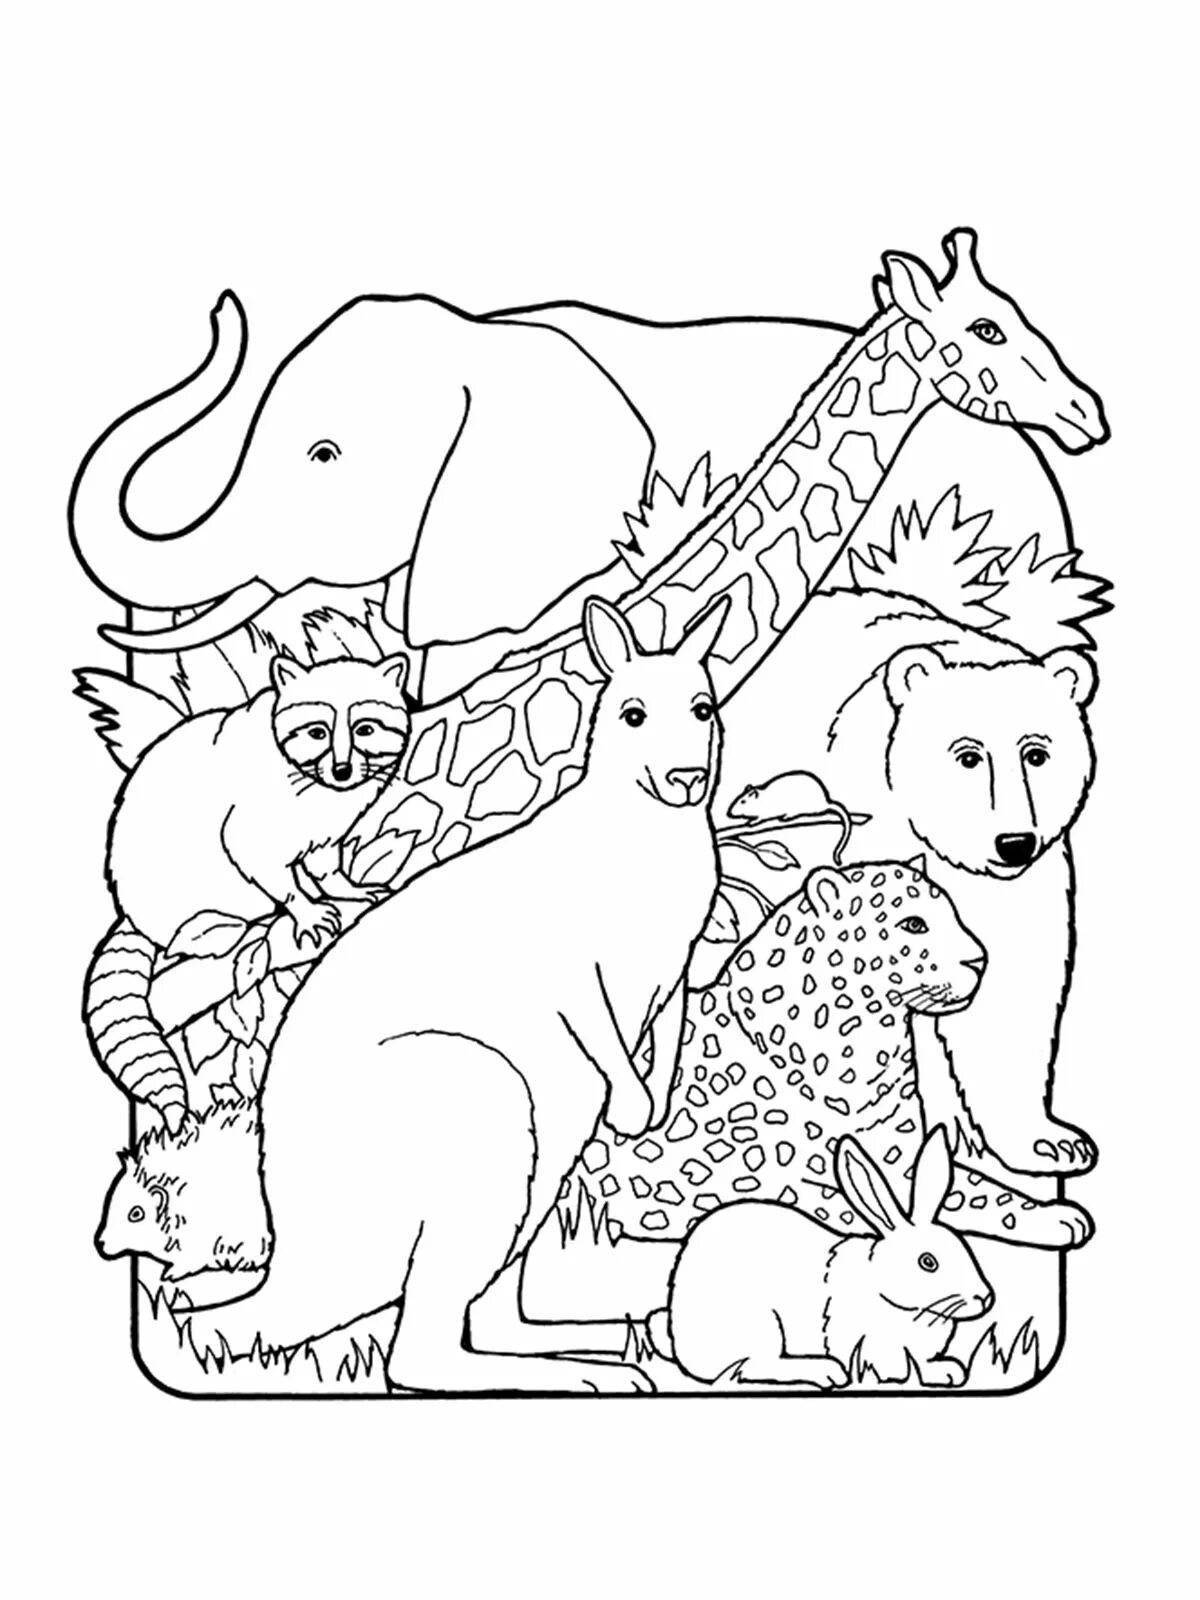 Fun coloring pages animals of hot and cold countries for preschoolers